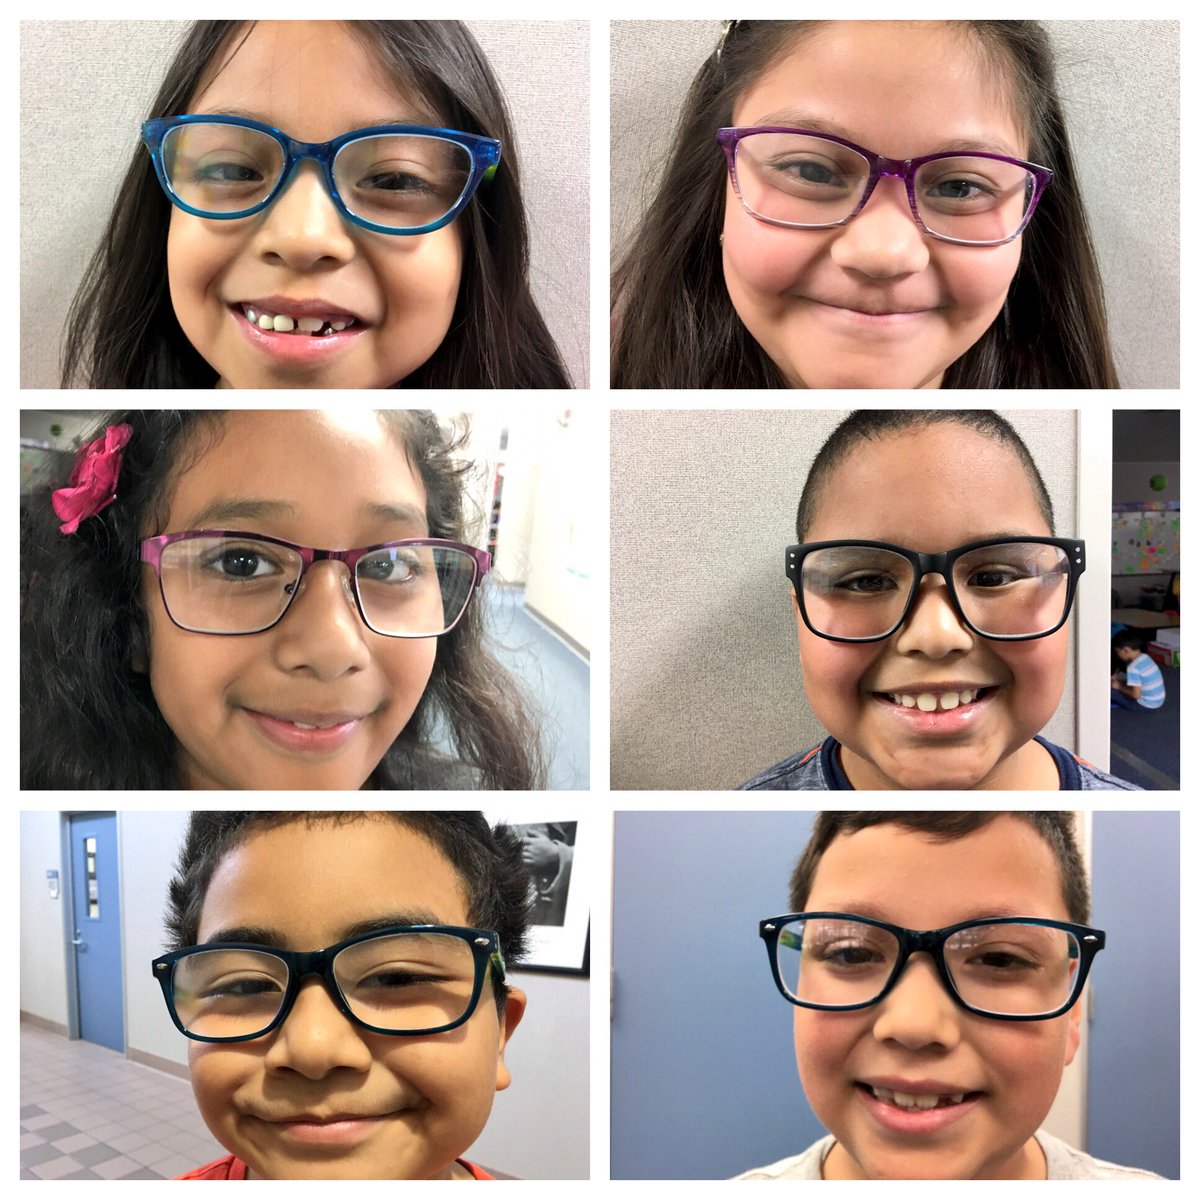 THE GLASSES ARE IN! Thank you to all who made #SeeToSucceed possible for many students @KirkElementary! @CyFairISD @hcphtx @HoustonHealth